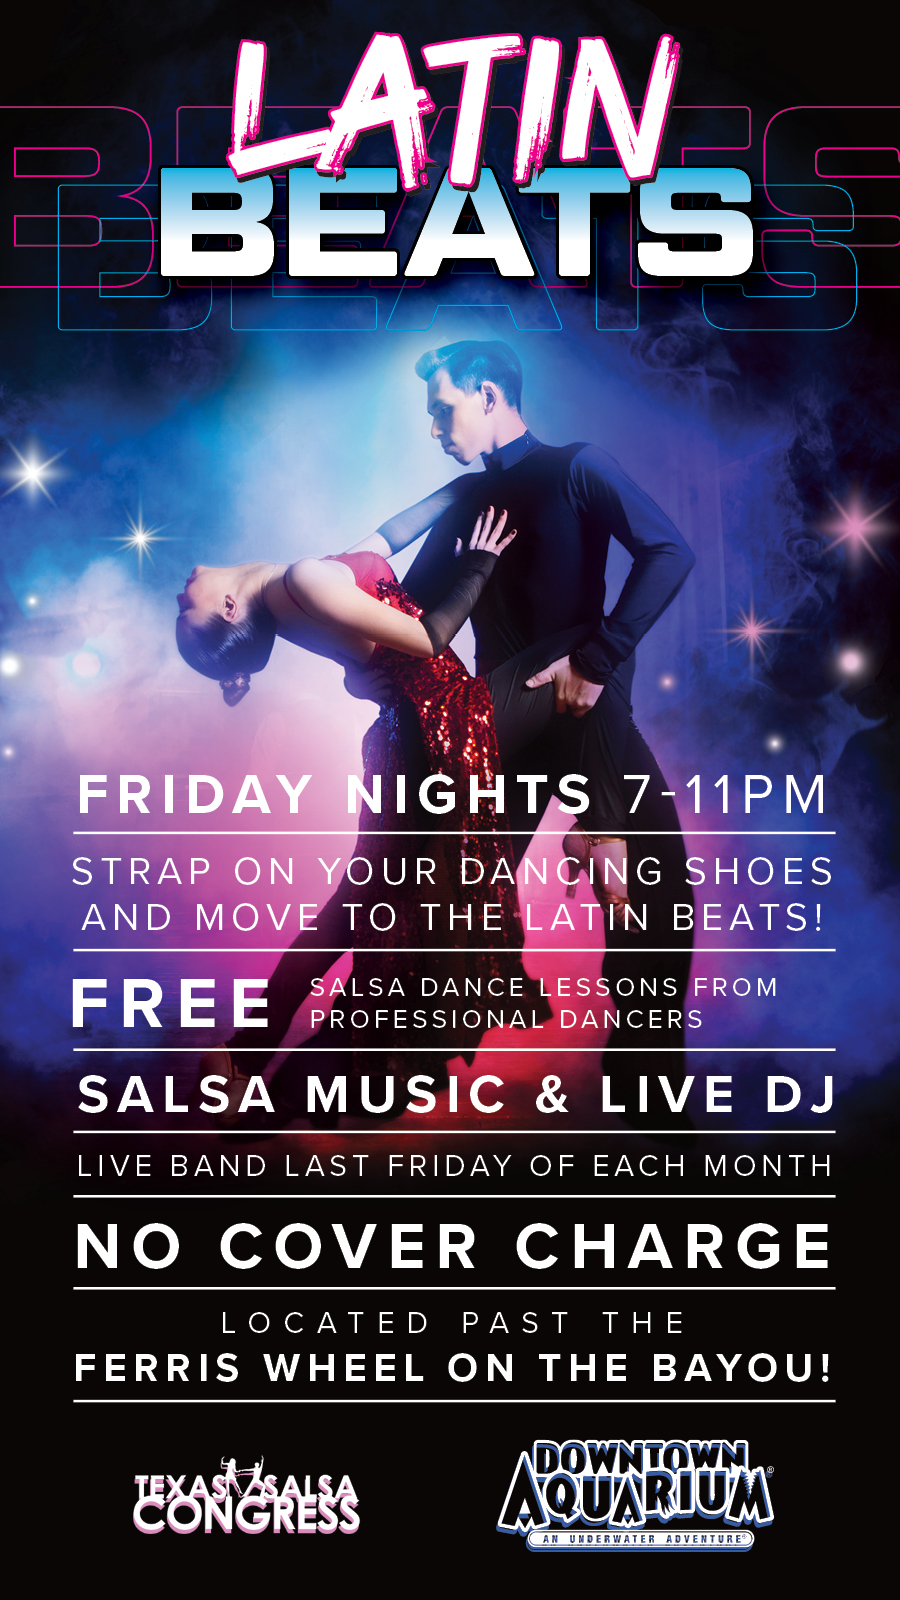 Latin Beats - Downtown Aquarium Friday Nights from 7pm-11pm. Strap on your dancing shoes and move to the latin beats! Free Salsa Dance lessons from professional dancers. Salsa music and Live DJ. Live Band last Friday of each month. Great Food and Drinks. No Cover Charge.